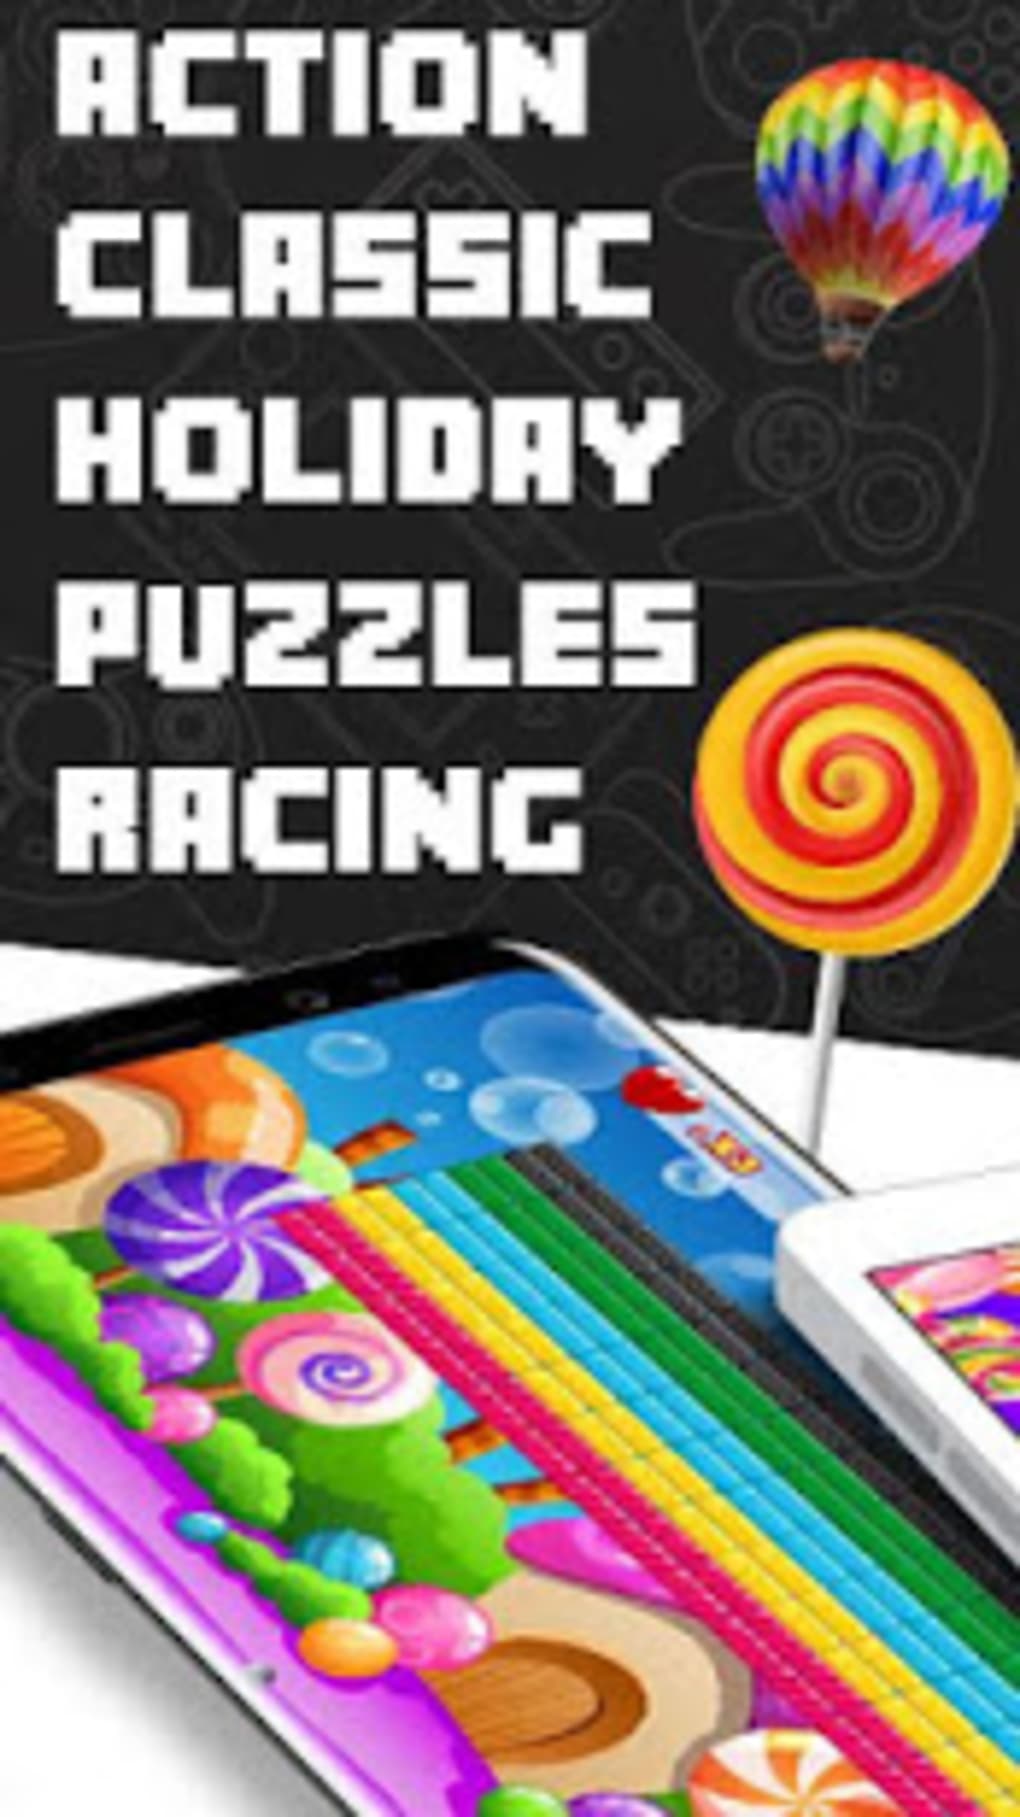 Games Hub - Fun Instant Games - Apps on Google Play